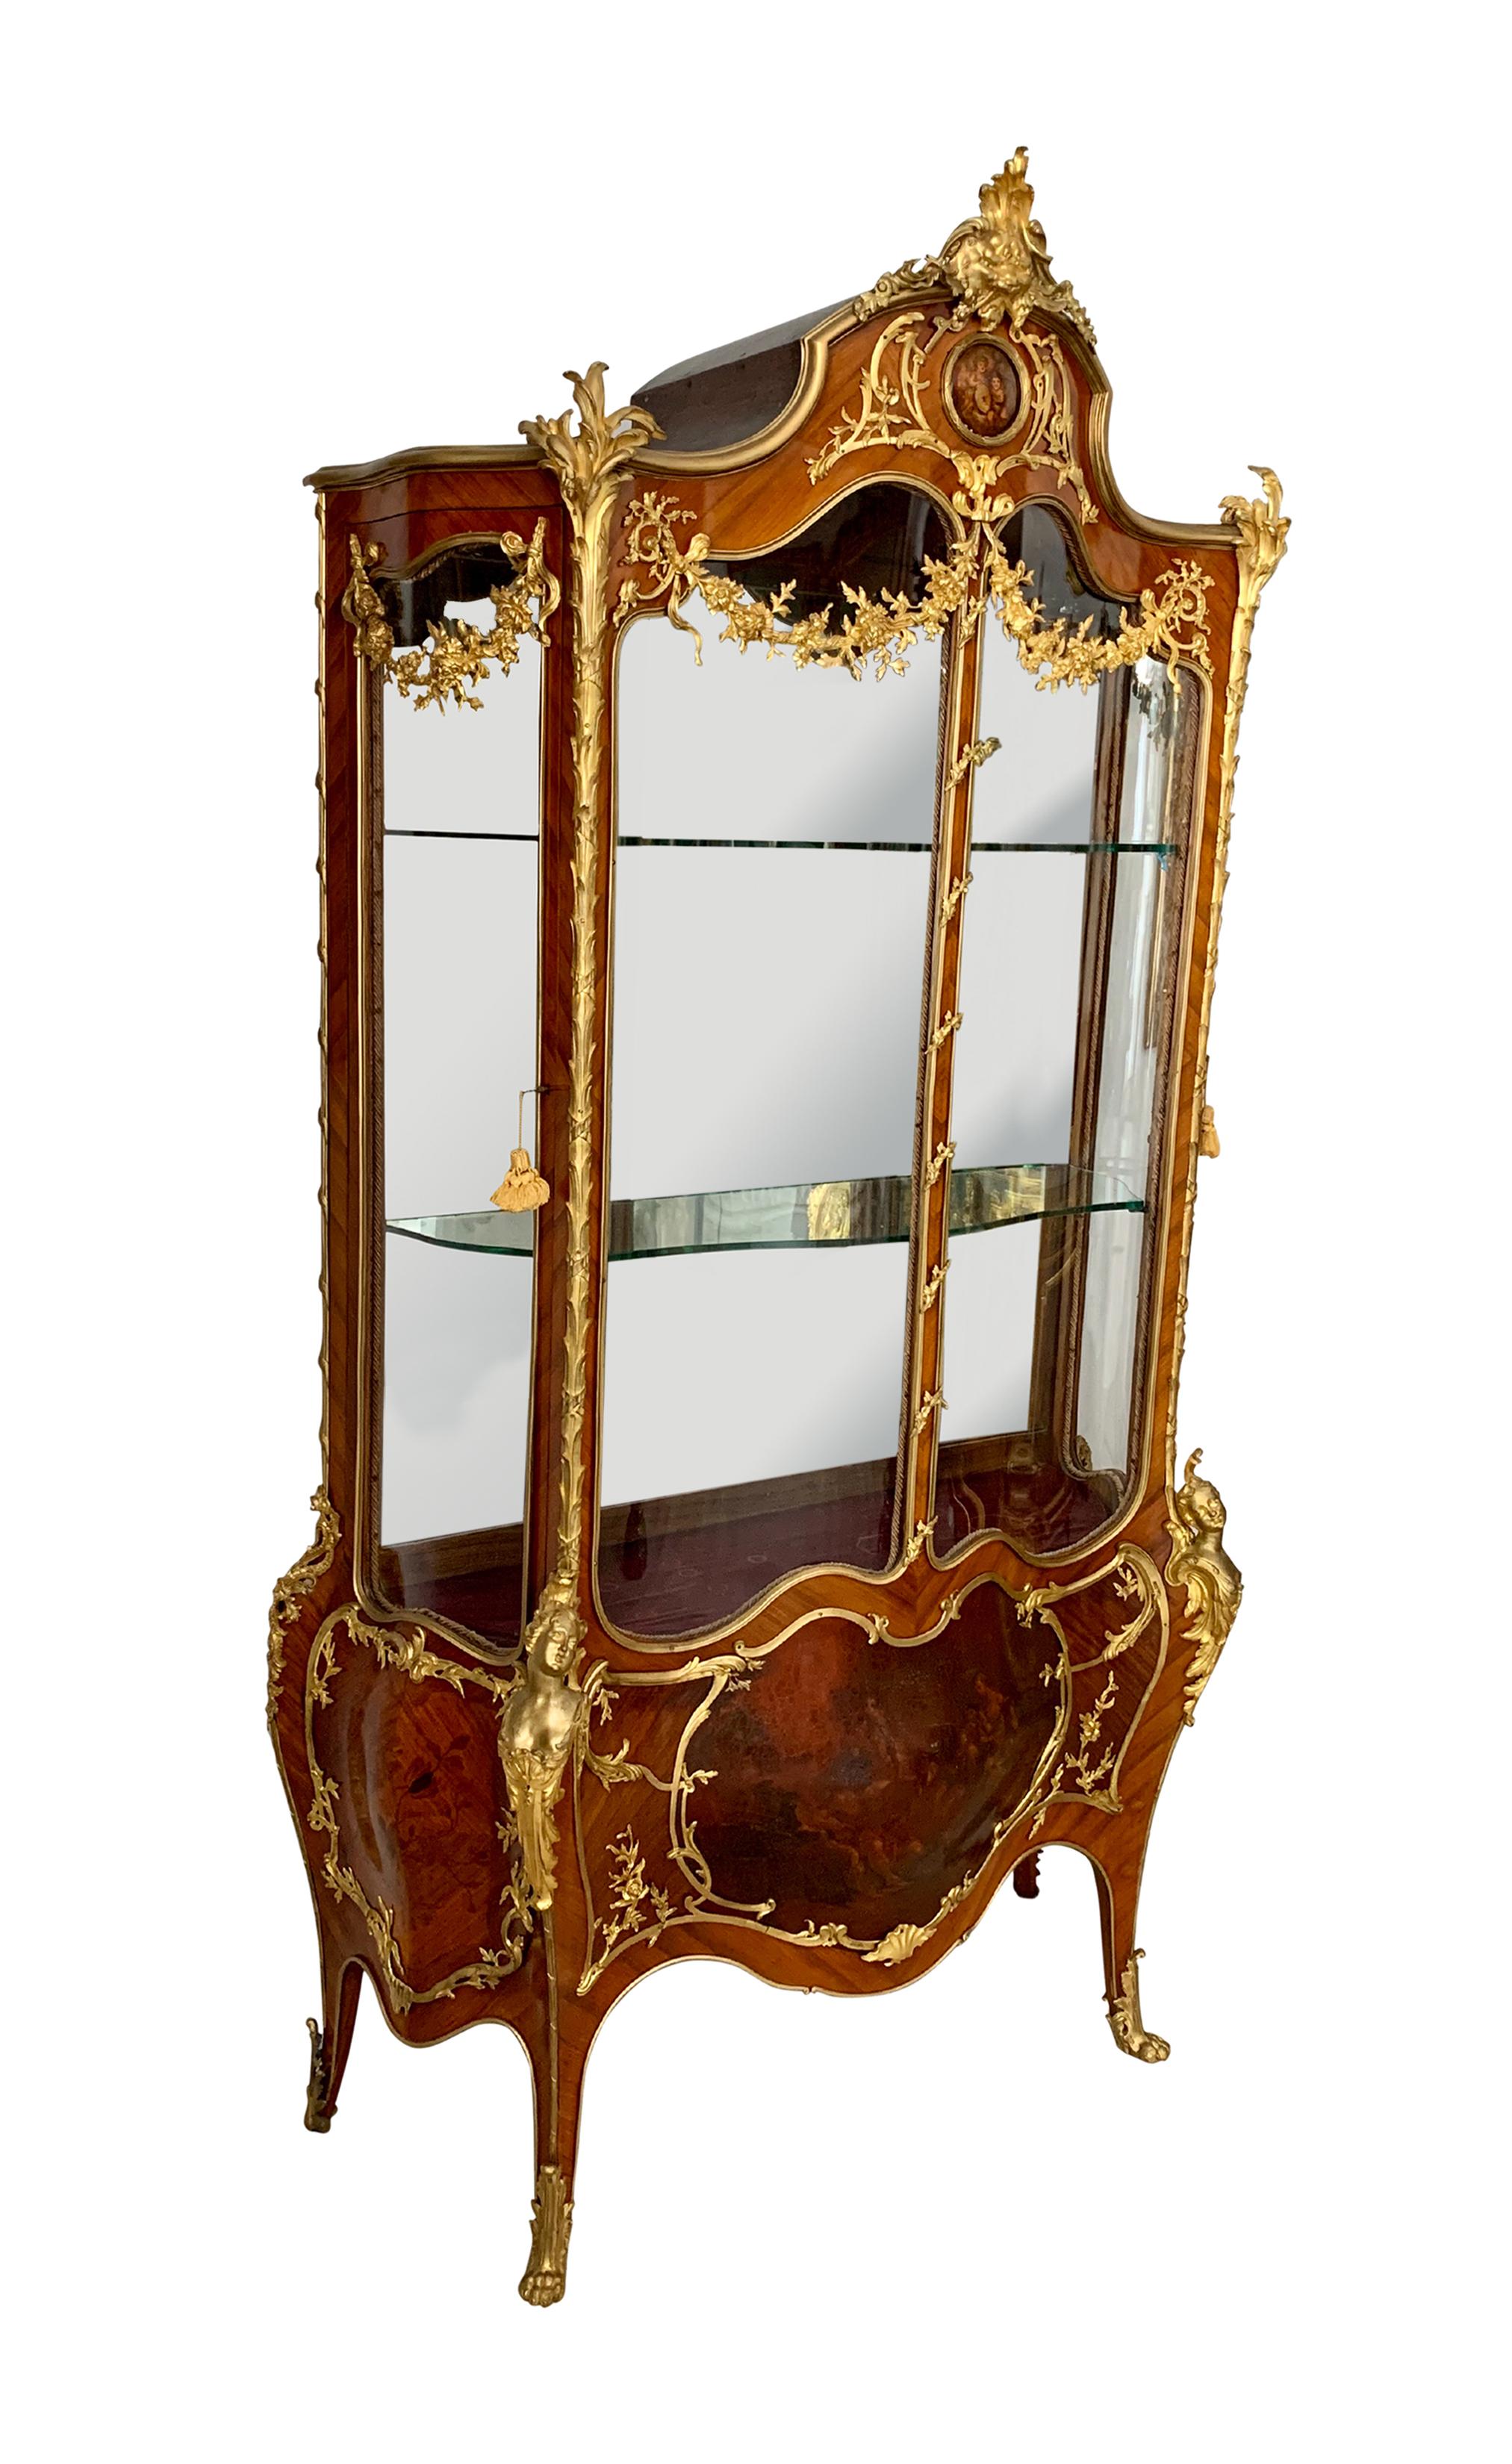 A Very Fine French 19th CenturyOrmolu-Mounted Louis XV Style Double-Door Vitrine For Sale 8